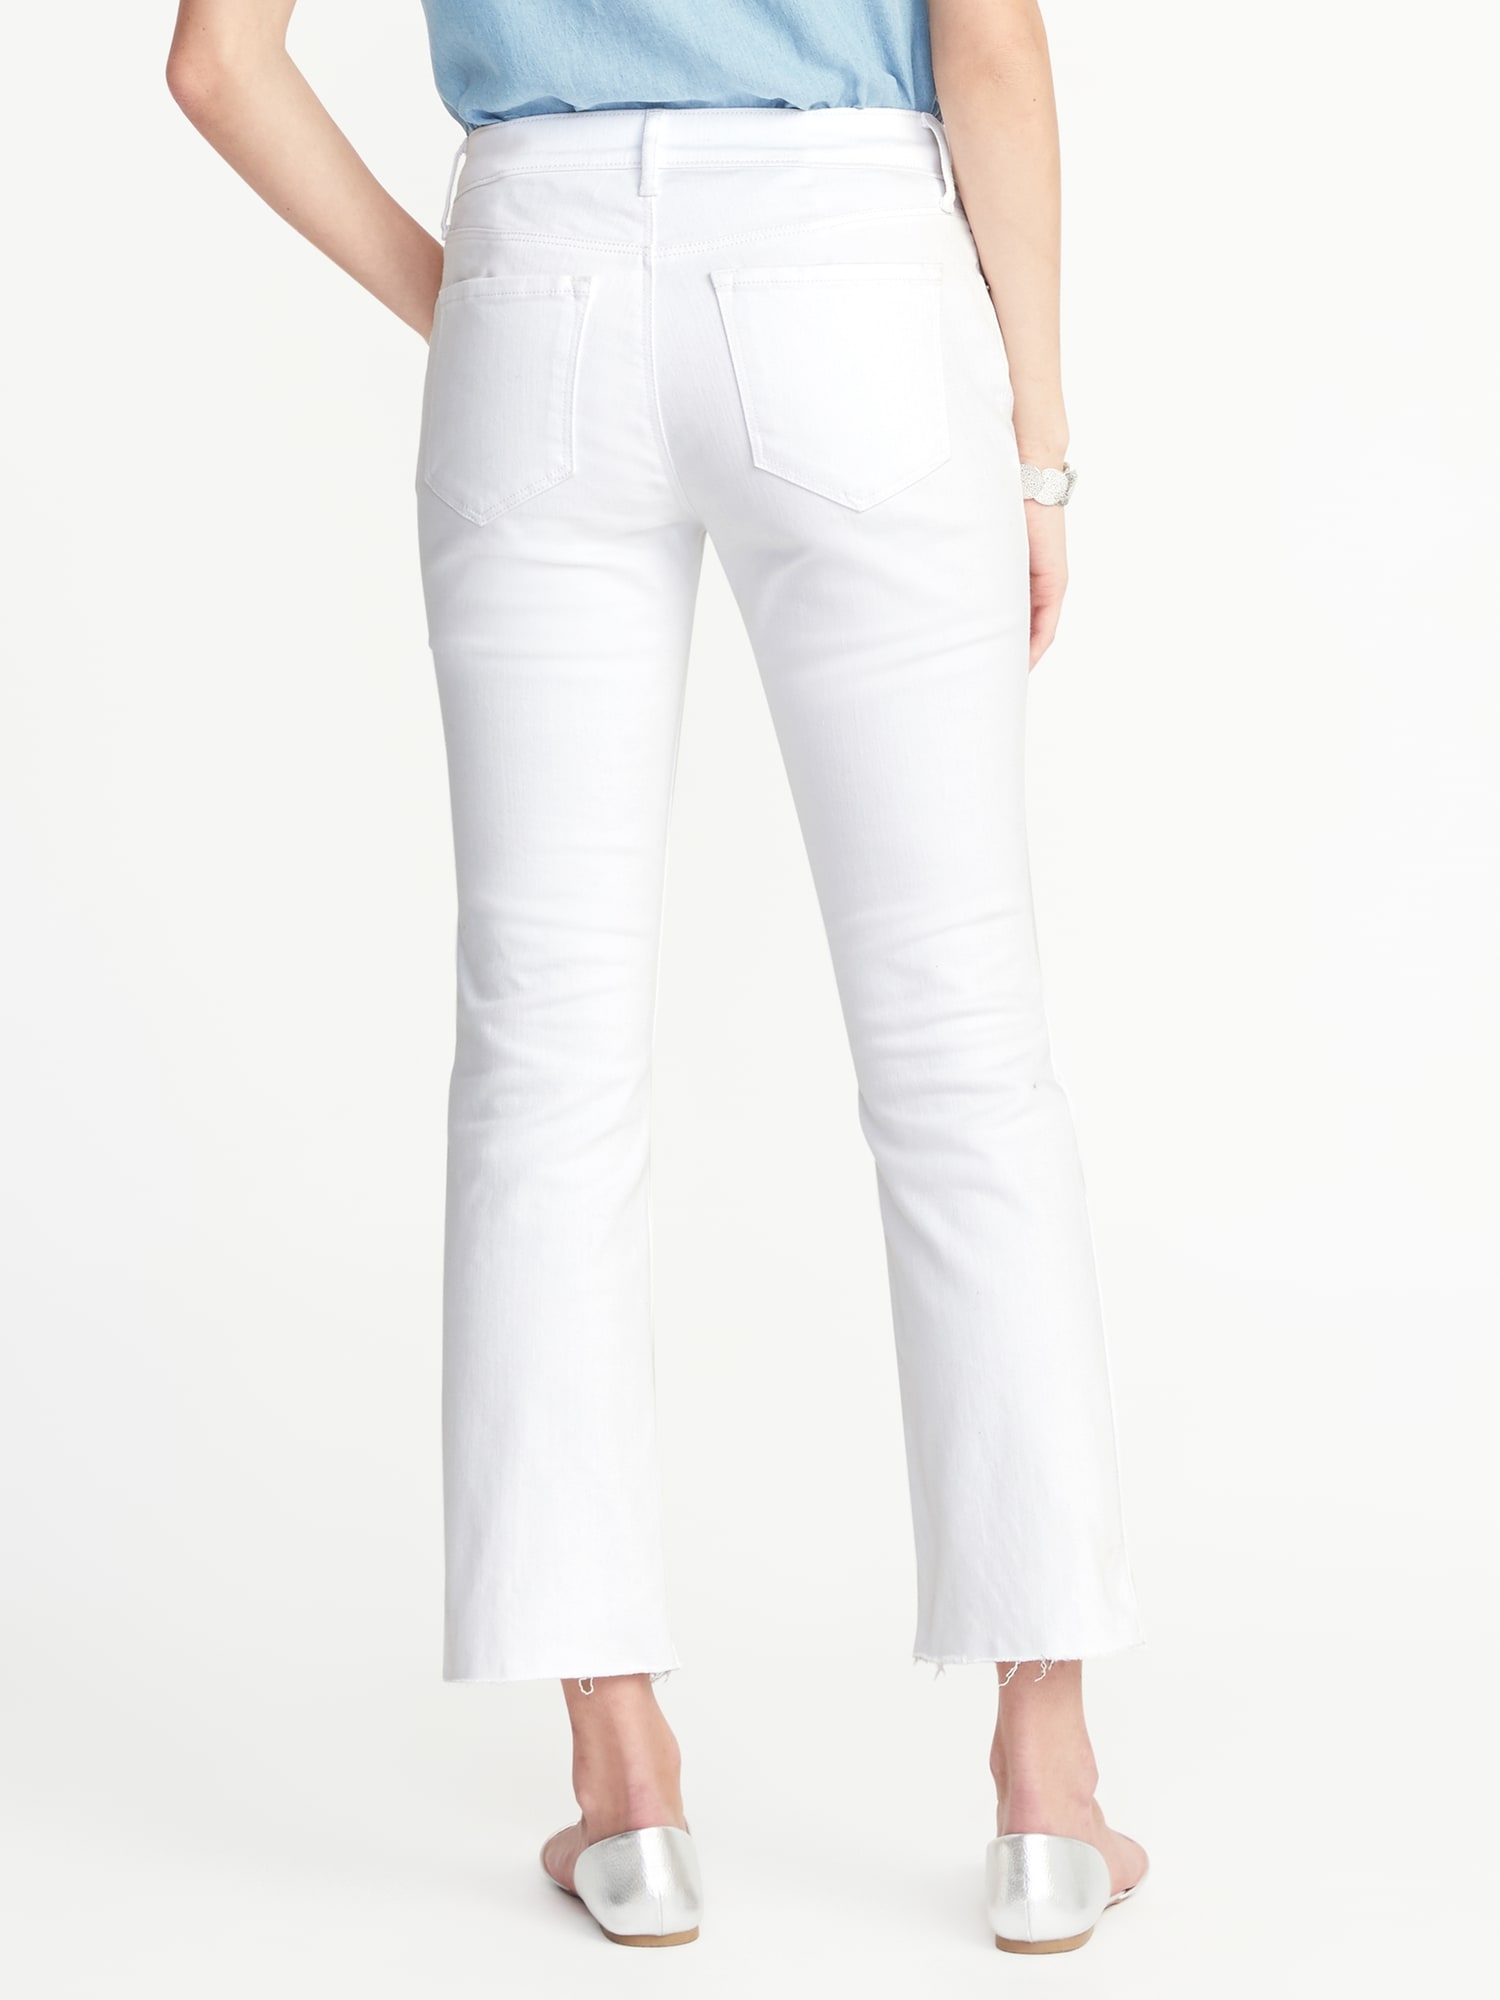 Cropped White Flare Ankle Jeans for Women | Old Navy